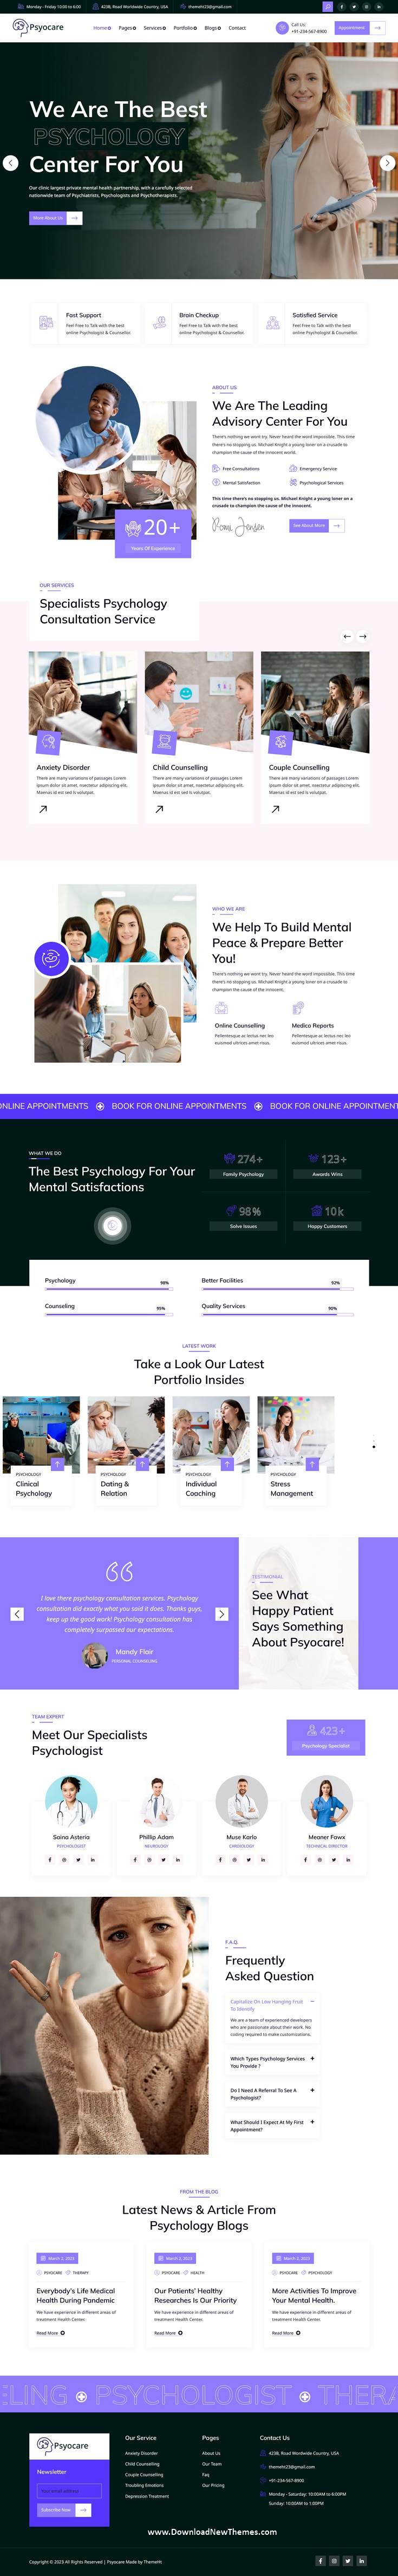 Psyocare - Psychology, Therapy, Health And Counseling WordPress Theme Review